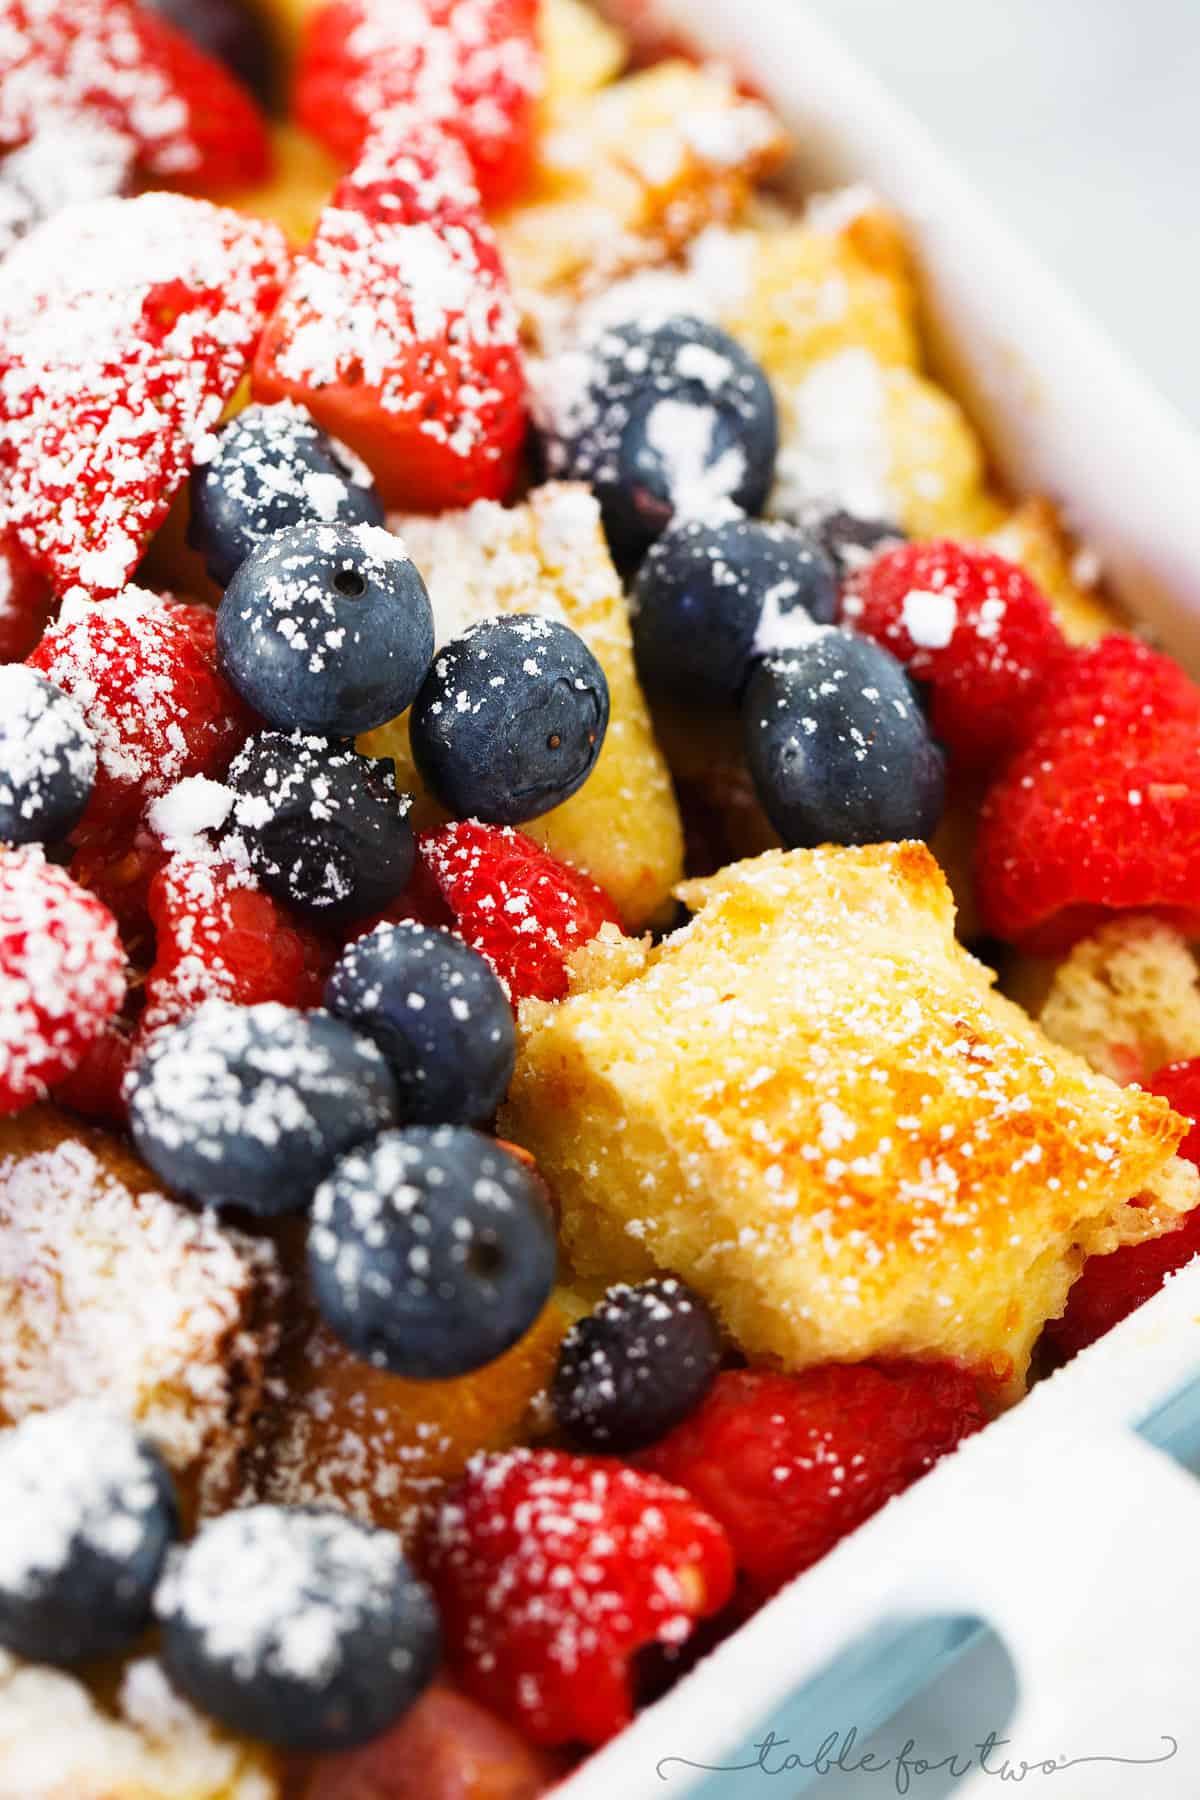 This triple berry brioche French toast bake is a breakfast or brunch dish that your overnight crew will love! Fresh berries are layered throughout the rich and buttery brioche bread. Your family and friends will love you!